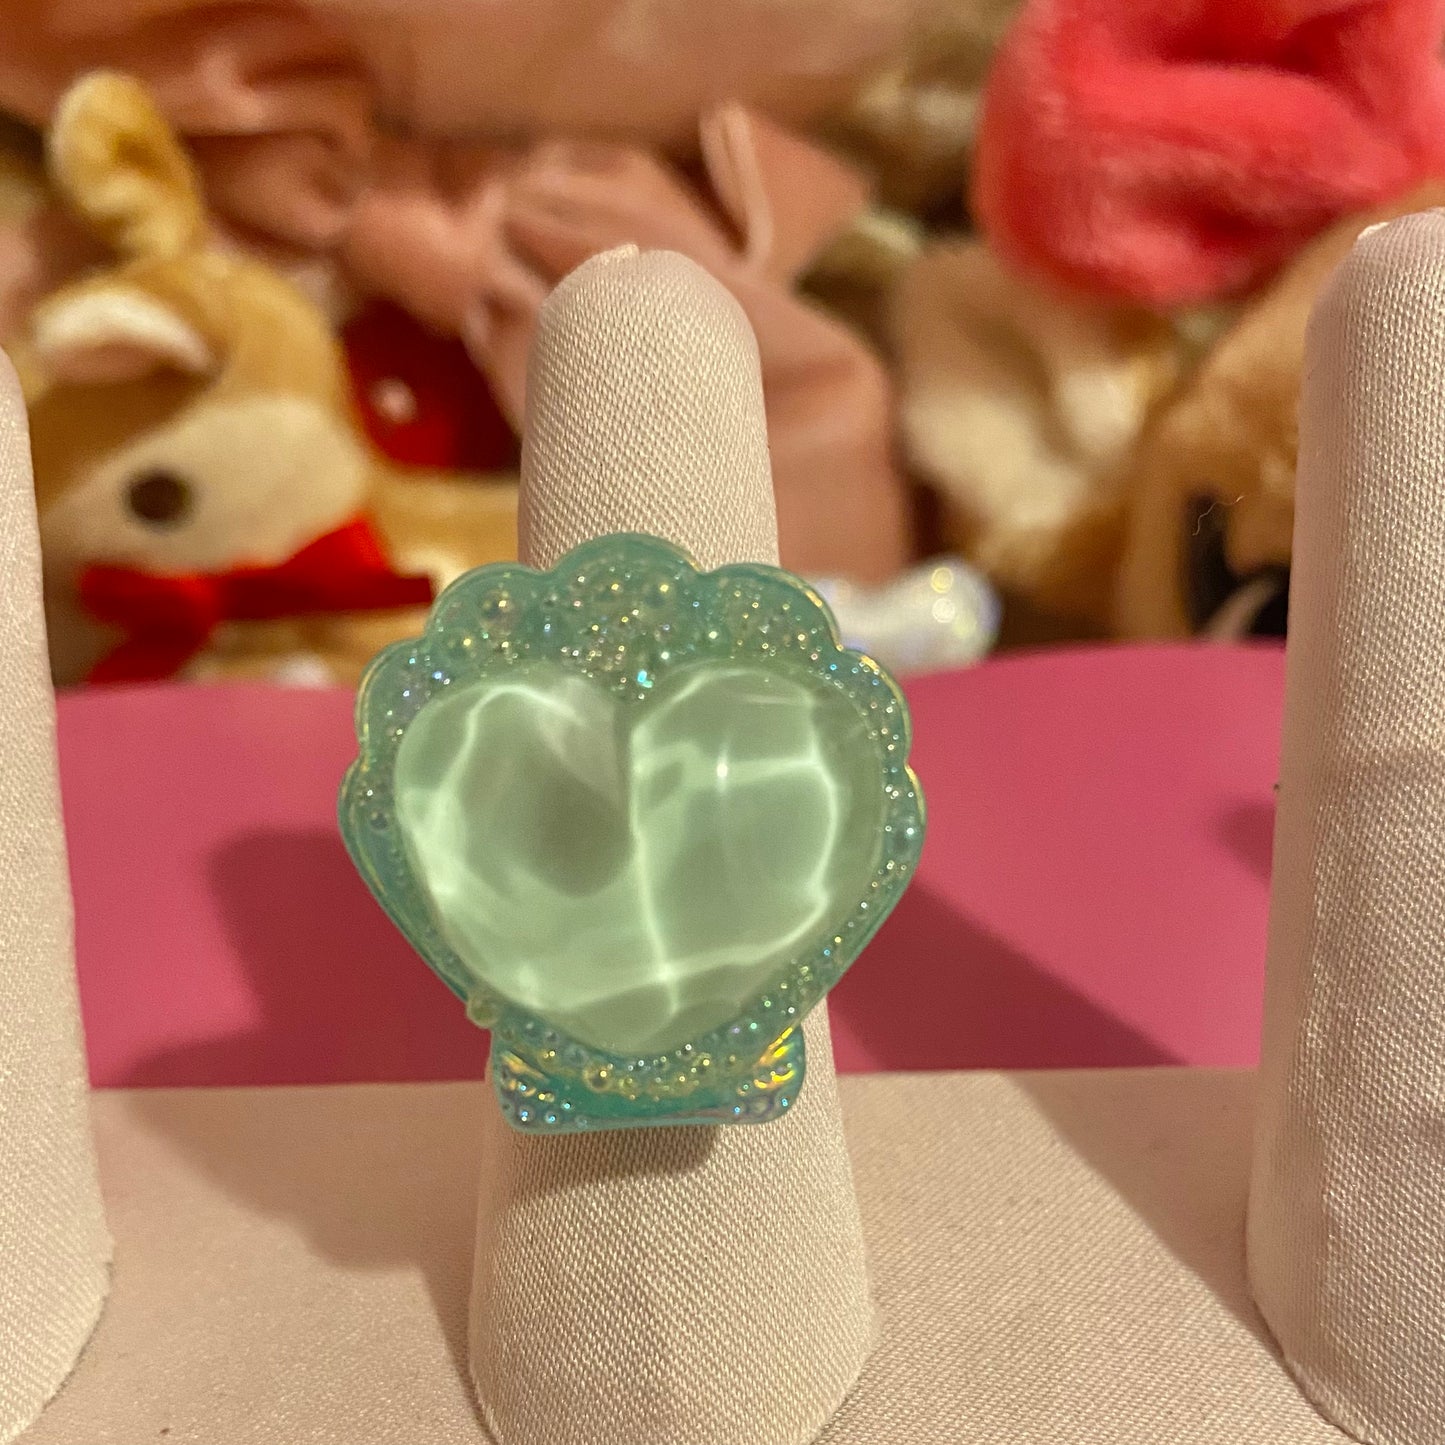 Heart of the Sea Ring